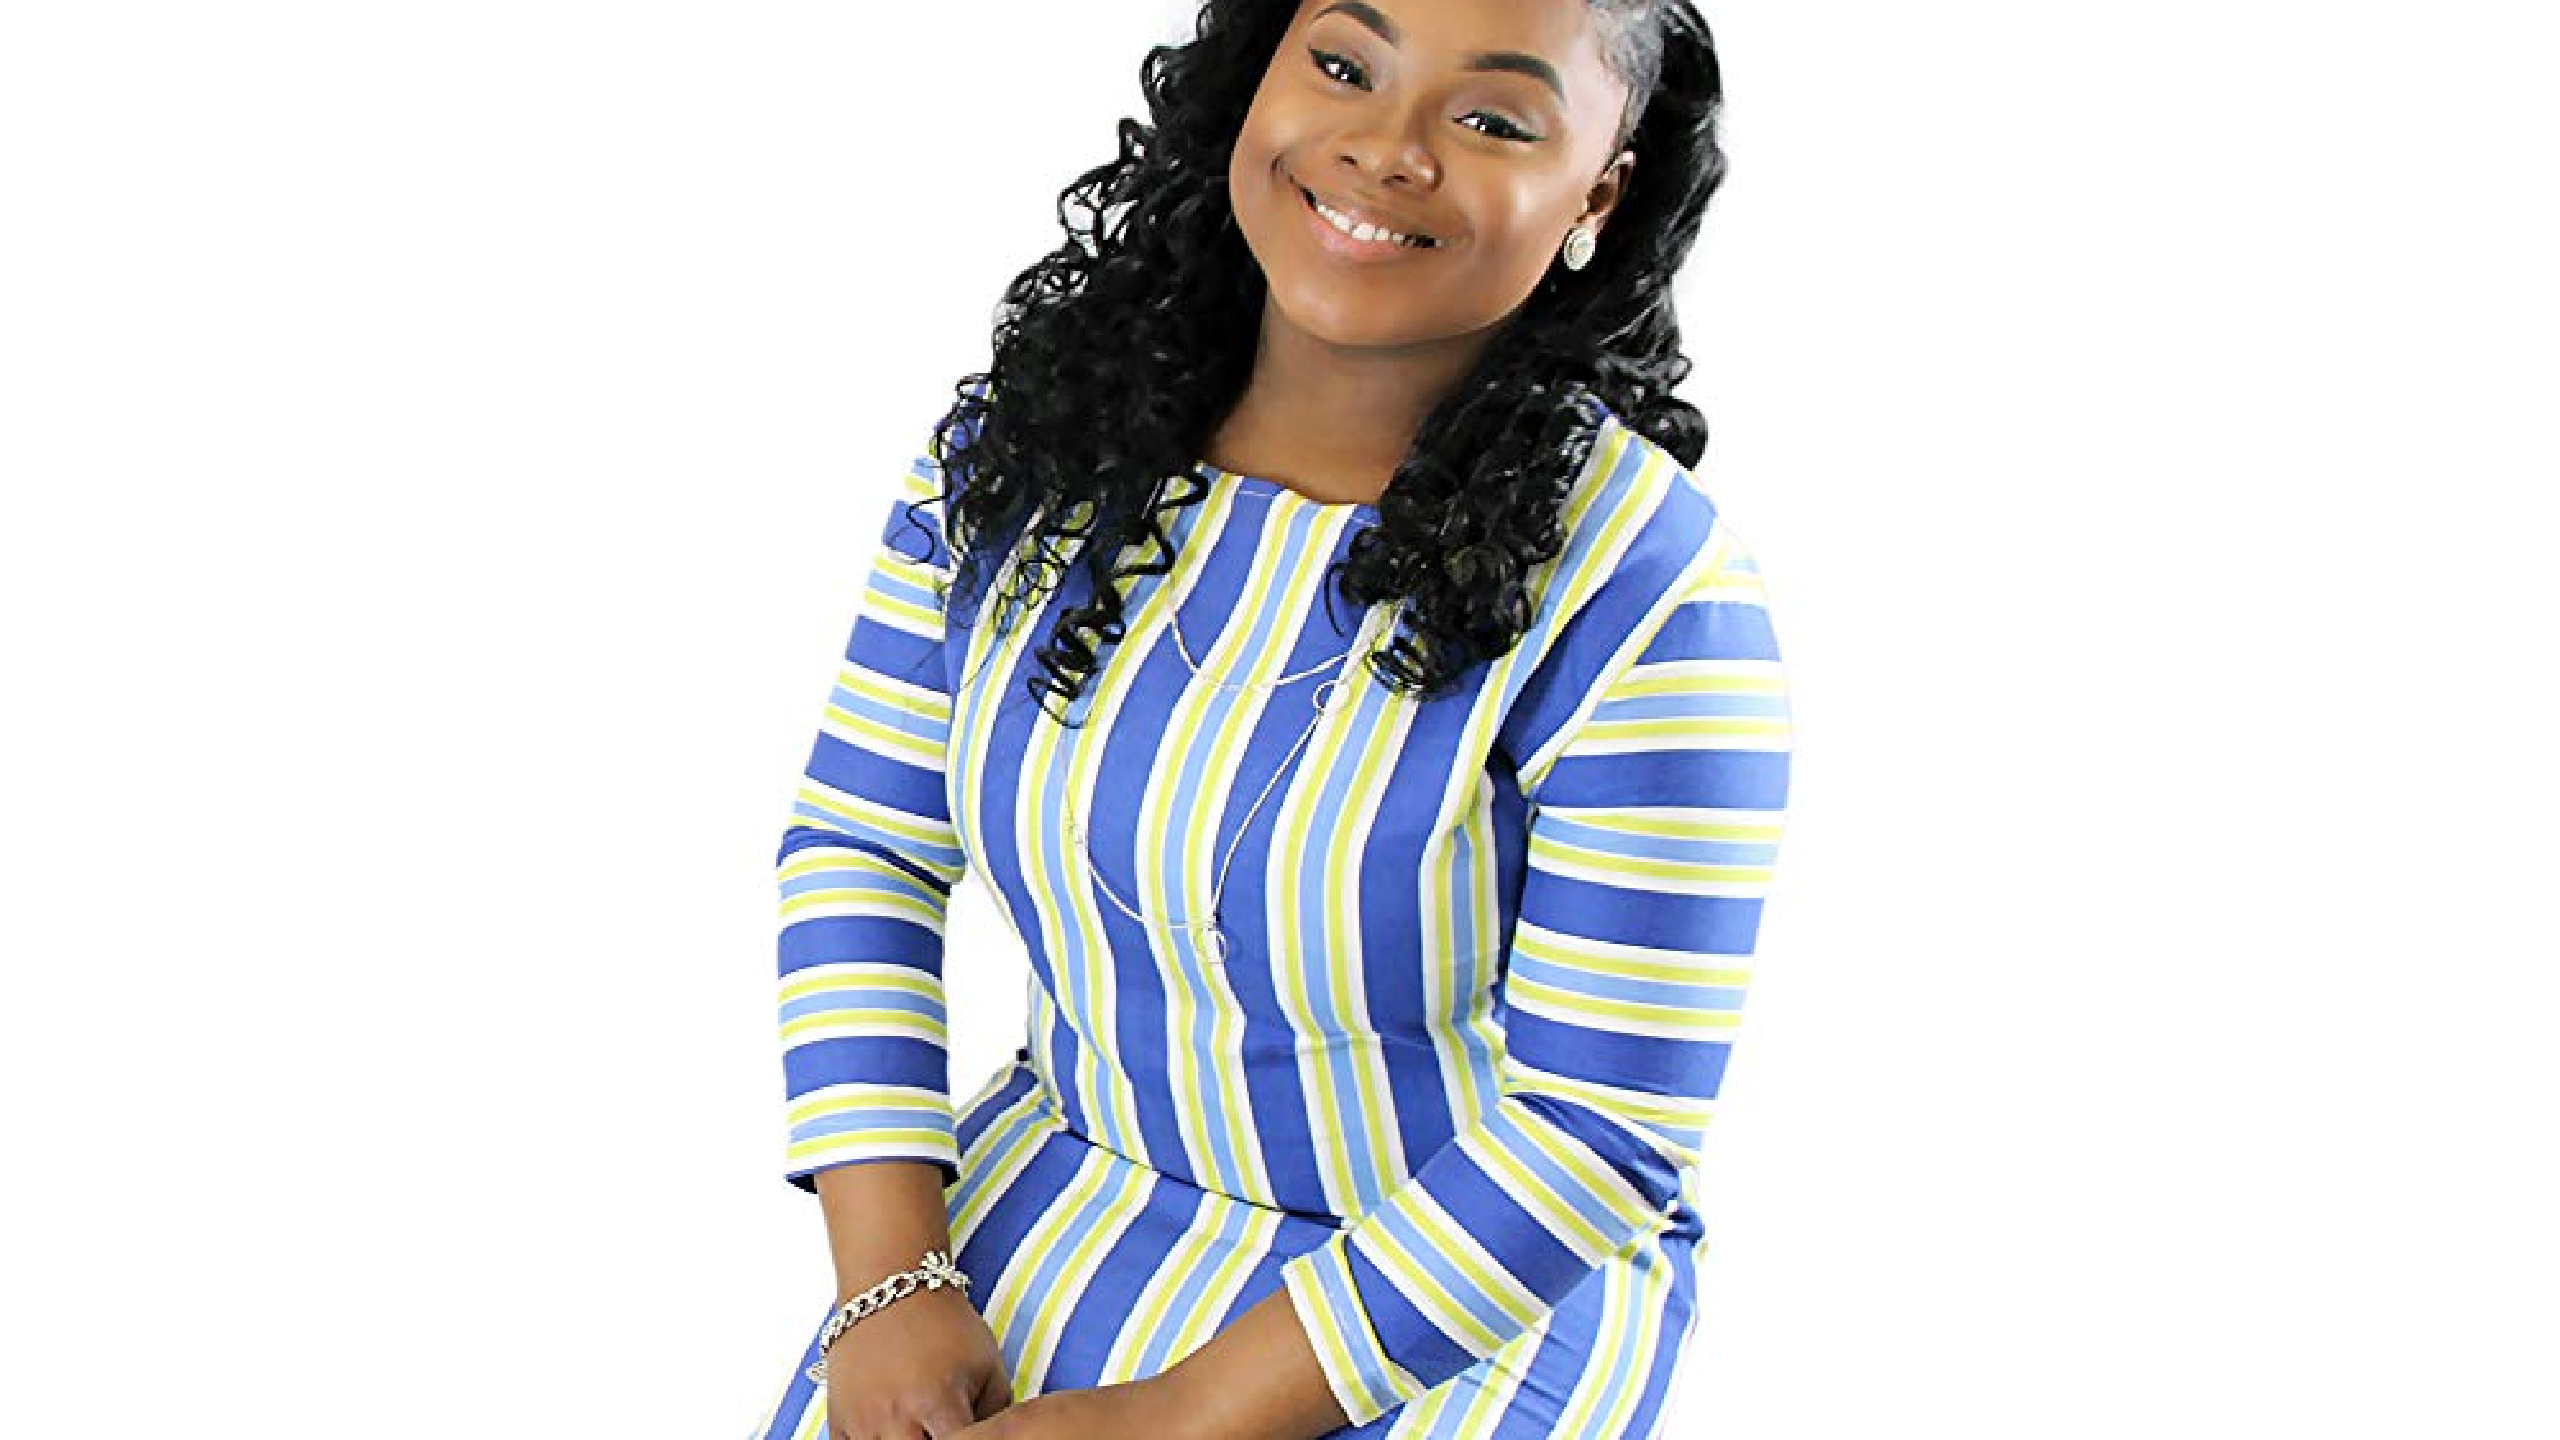 Jekalyn Carr tour dates 2022 2023. Jekalyn Carr tickets and concerts